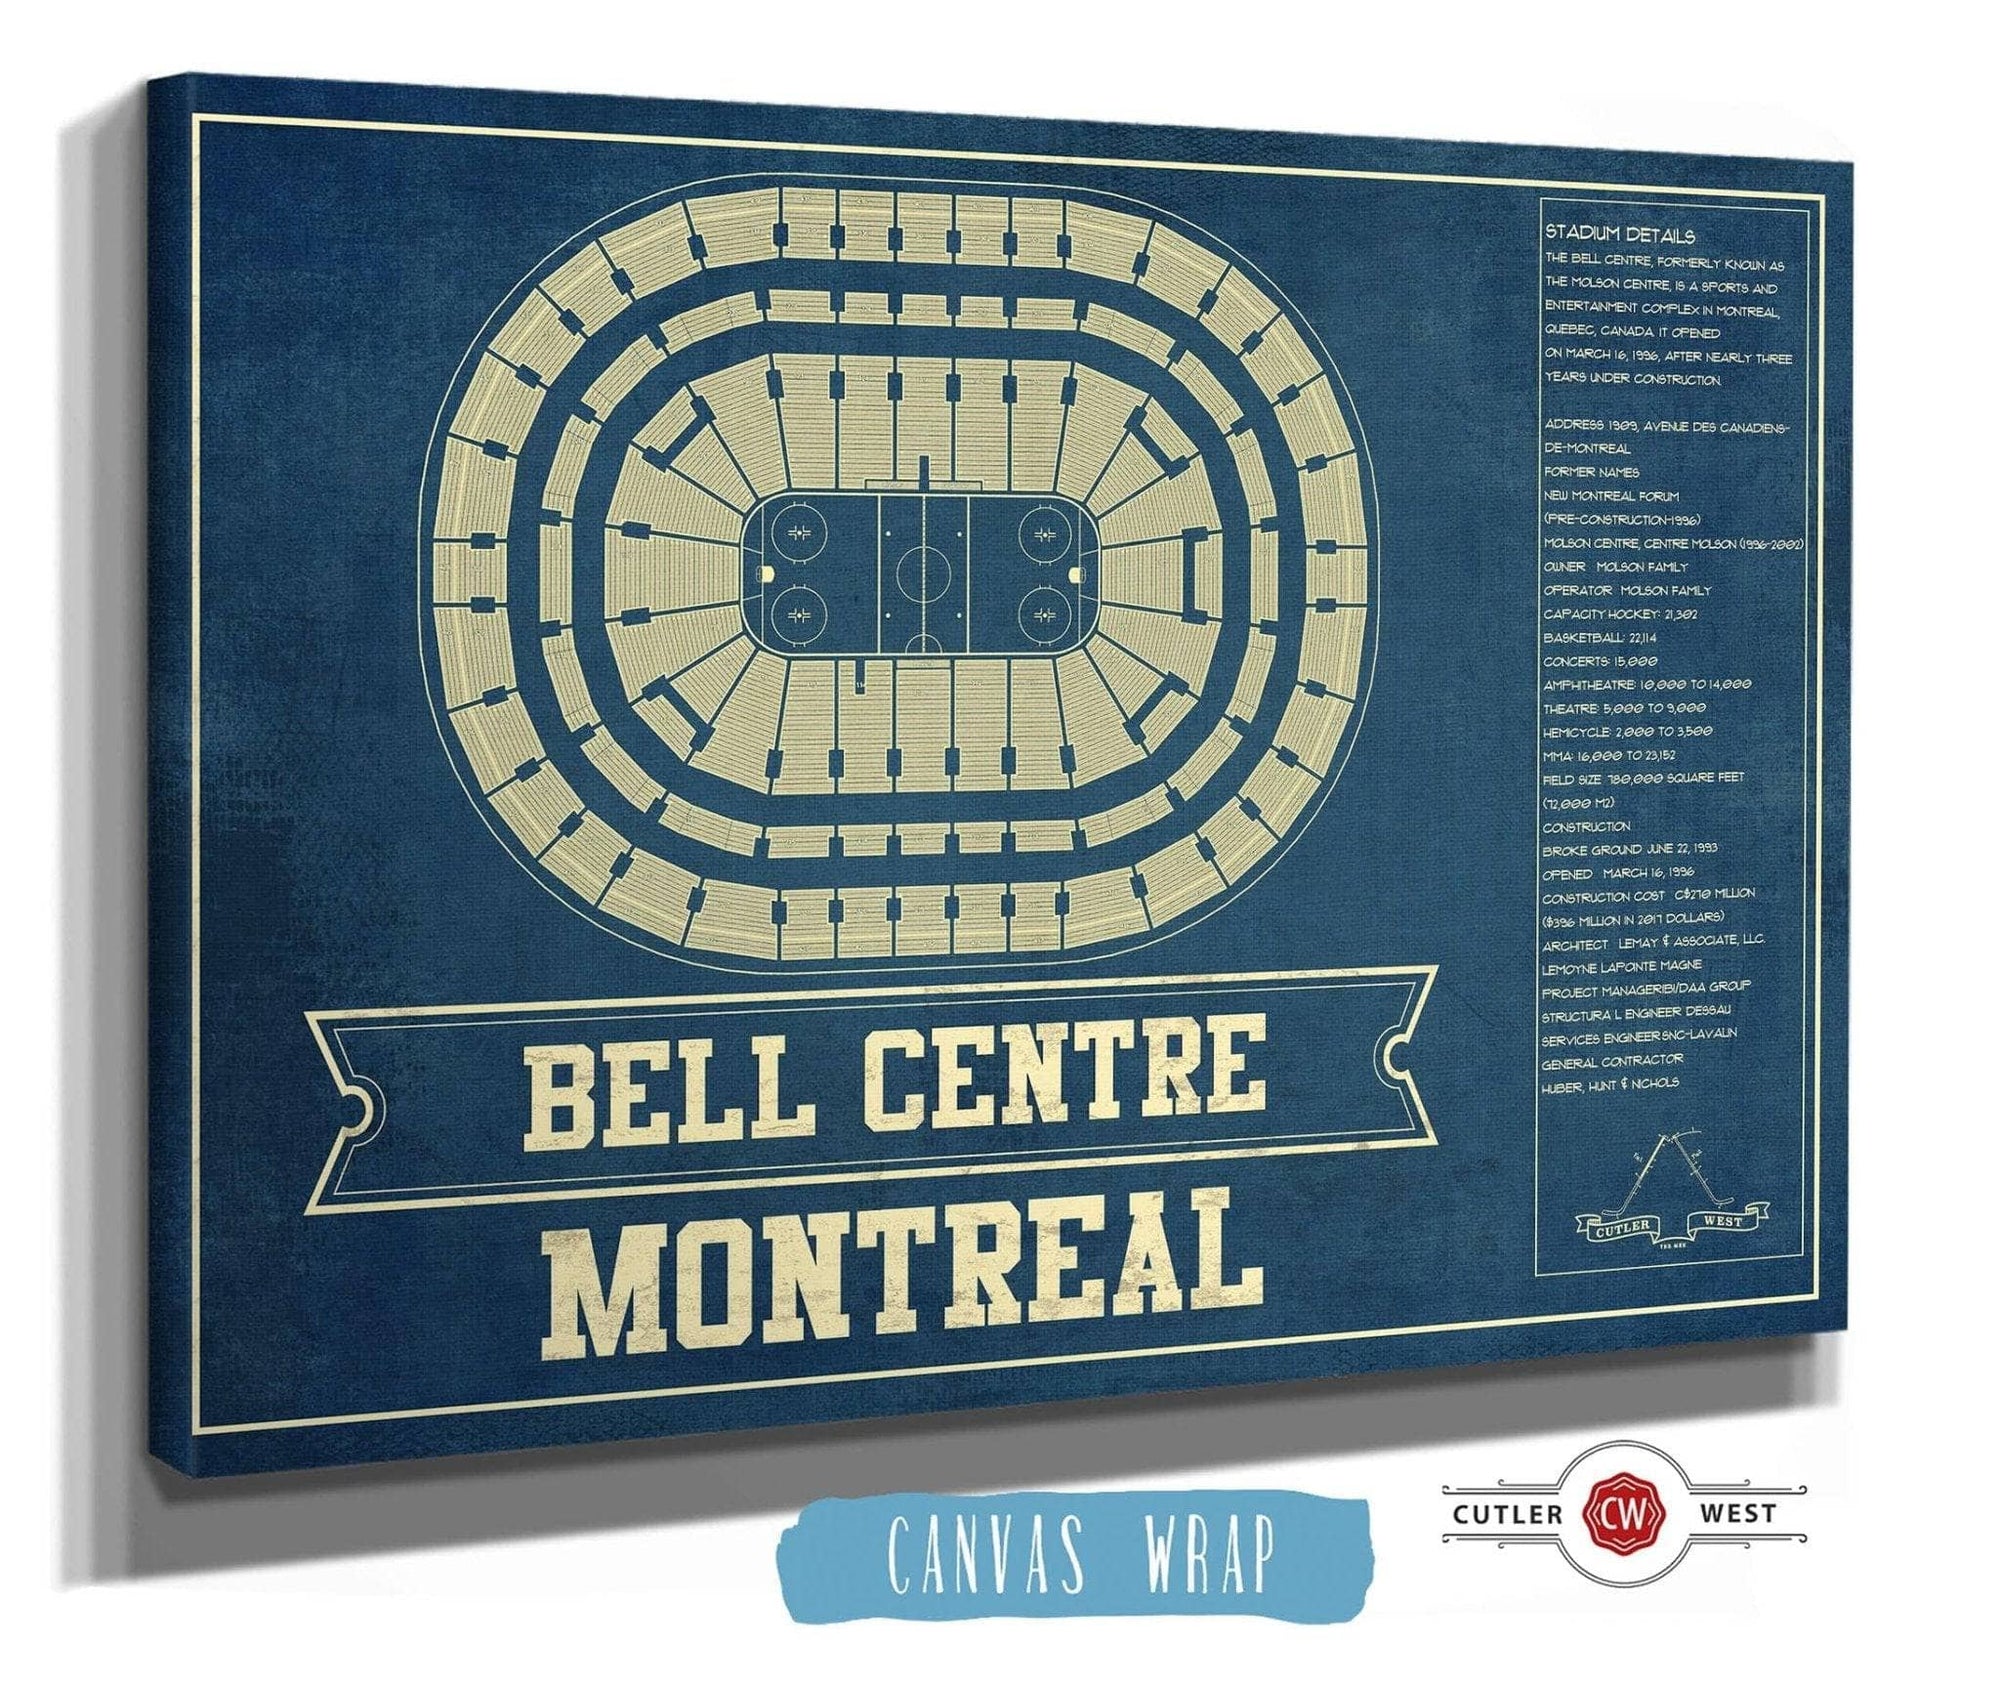 Cutler West 14" x 11" / Stretched Canvas Wrap Montreal Canadiens Bell Centre Seating Chart - Vintage Hockey Print 673822723_80000